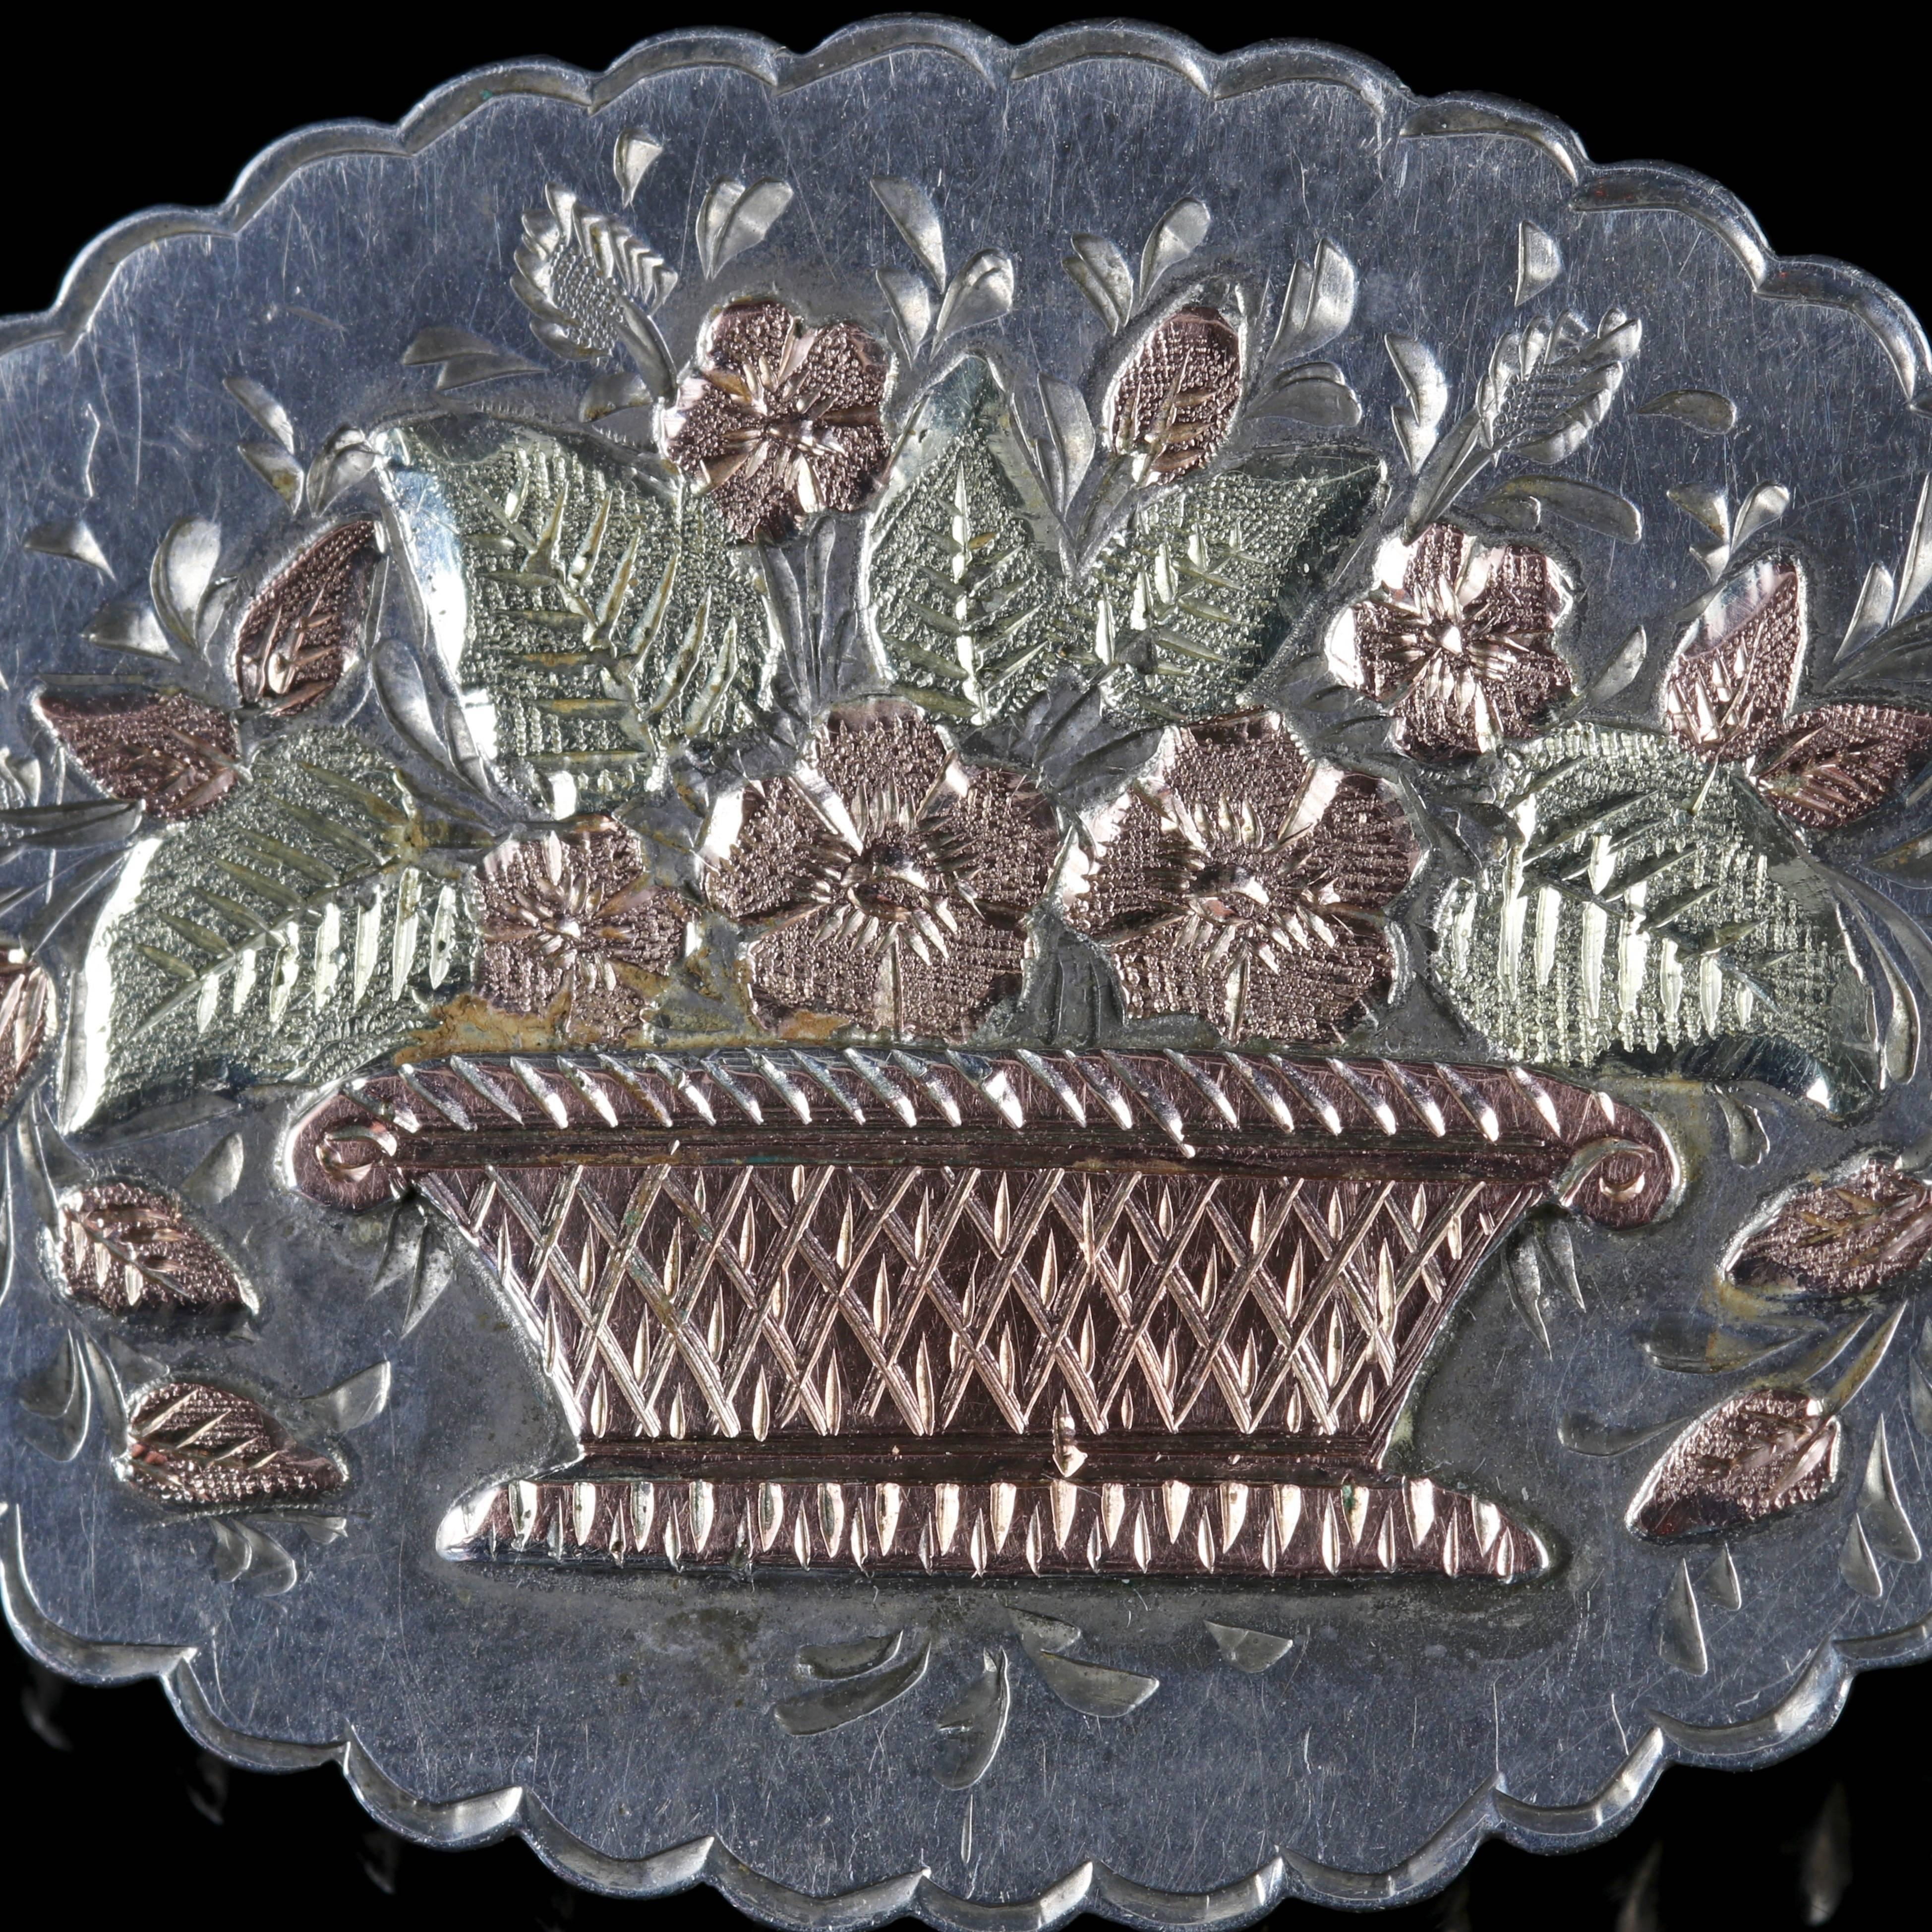 This fabulous Antique Victorian Silver brooch depicts a beautiful bouquet of flowers cascading from a basket.

Fully hallmarked Birmingham 1888.

The Brooch is set in Silver with an 18ct Yellow Gold/ Rose Gold bouquet in the centre.

Detailed